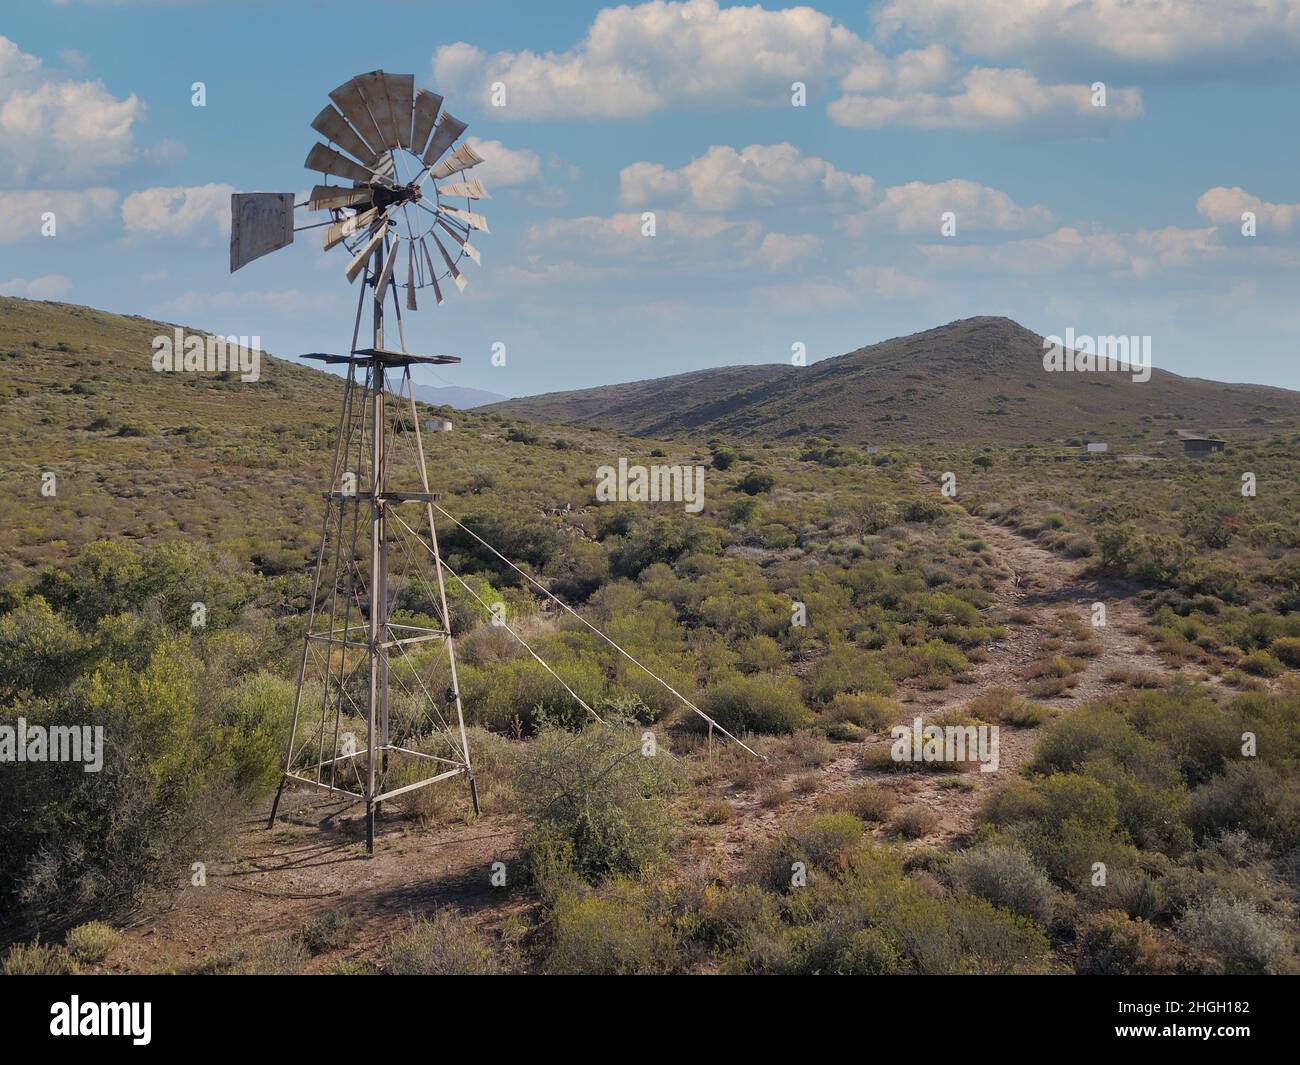 Windmill and water pump in dry landscape Stock Photo